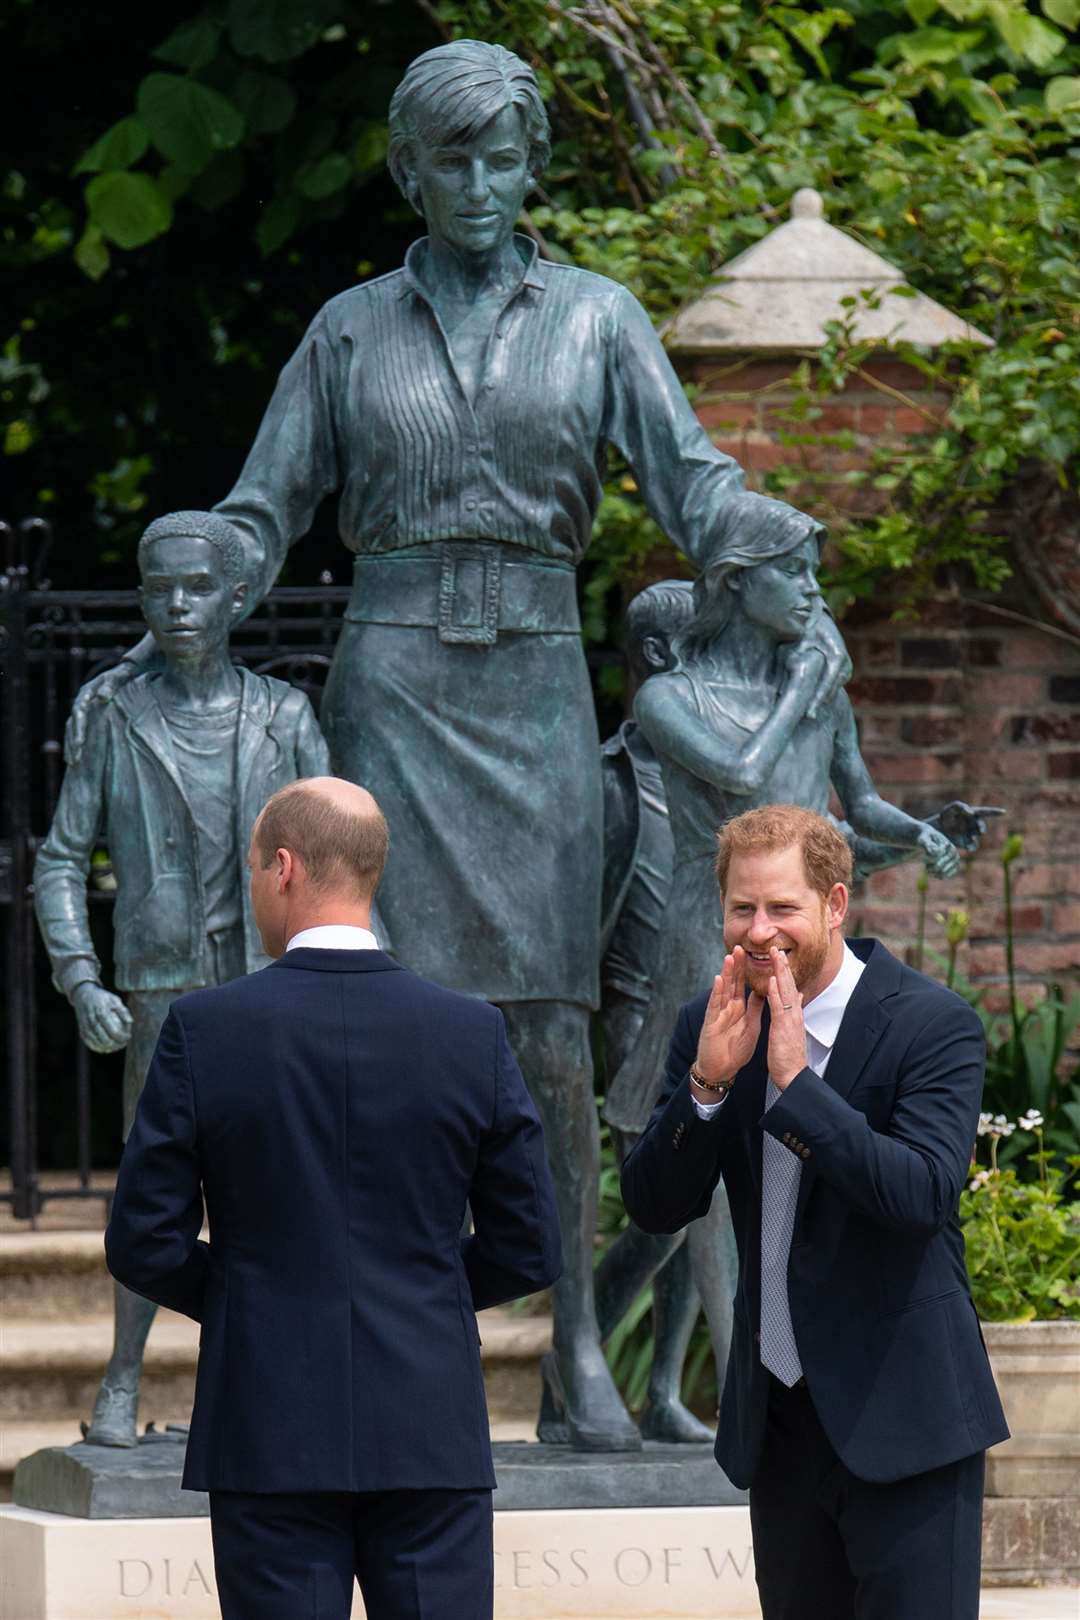 Harry made an effort to make his brother laugh at the ceremony (Dominic Lipinski/PA)